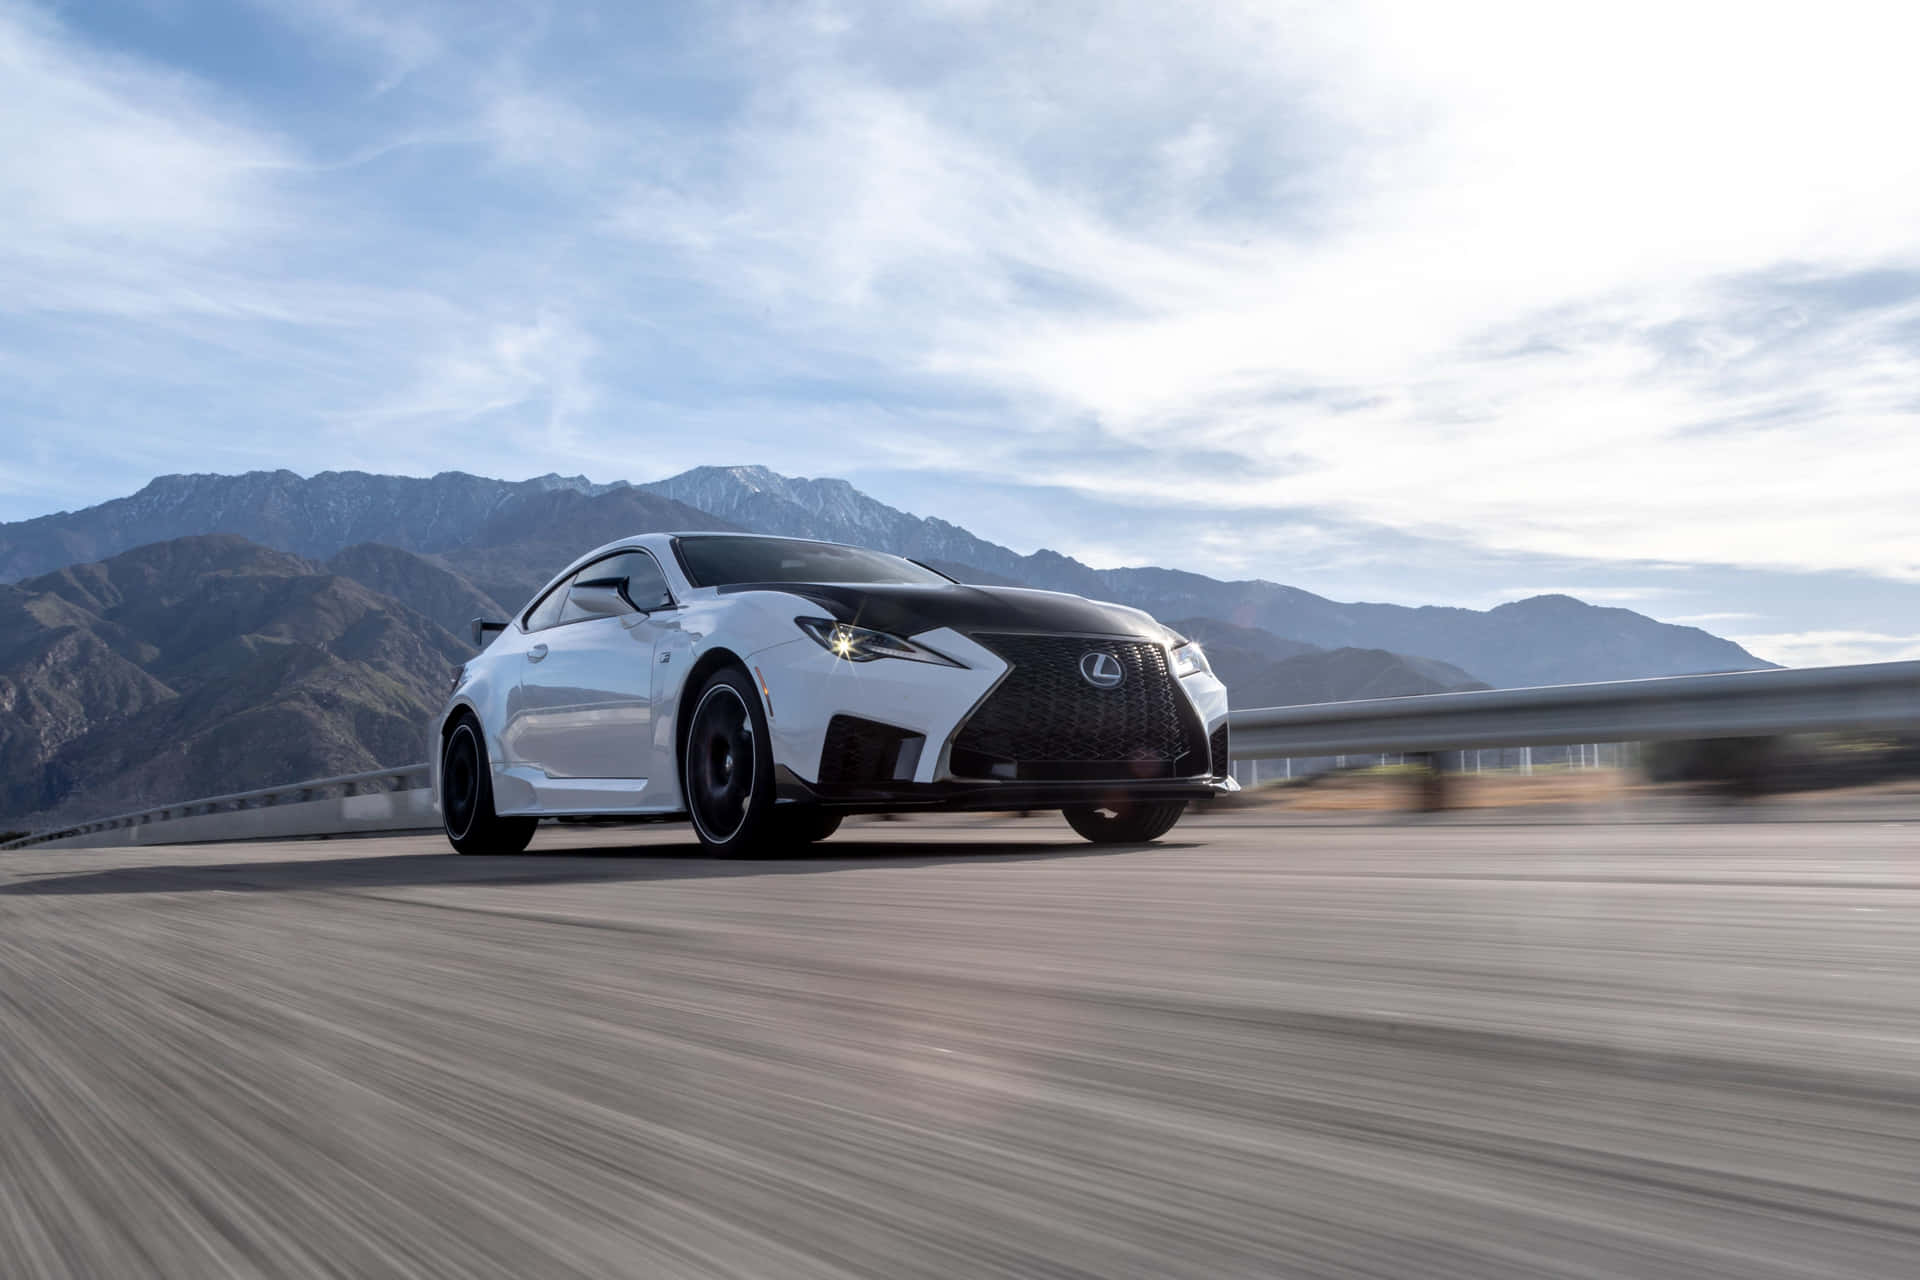 The Lexus Rc F Sports Car Driving On A Mountain Road Wallpaper